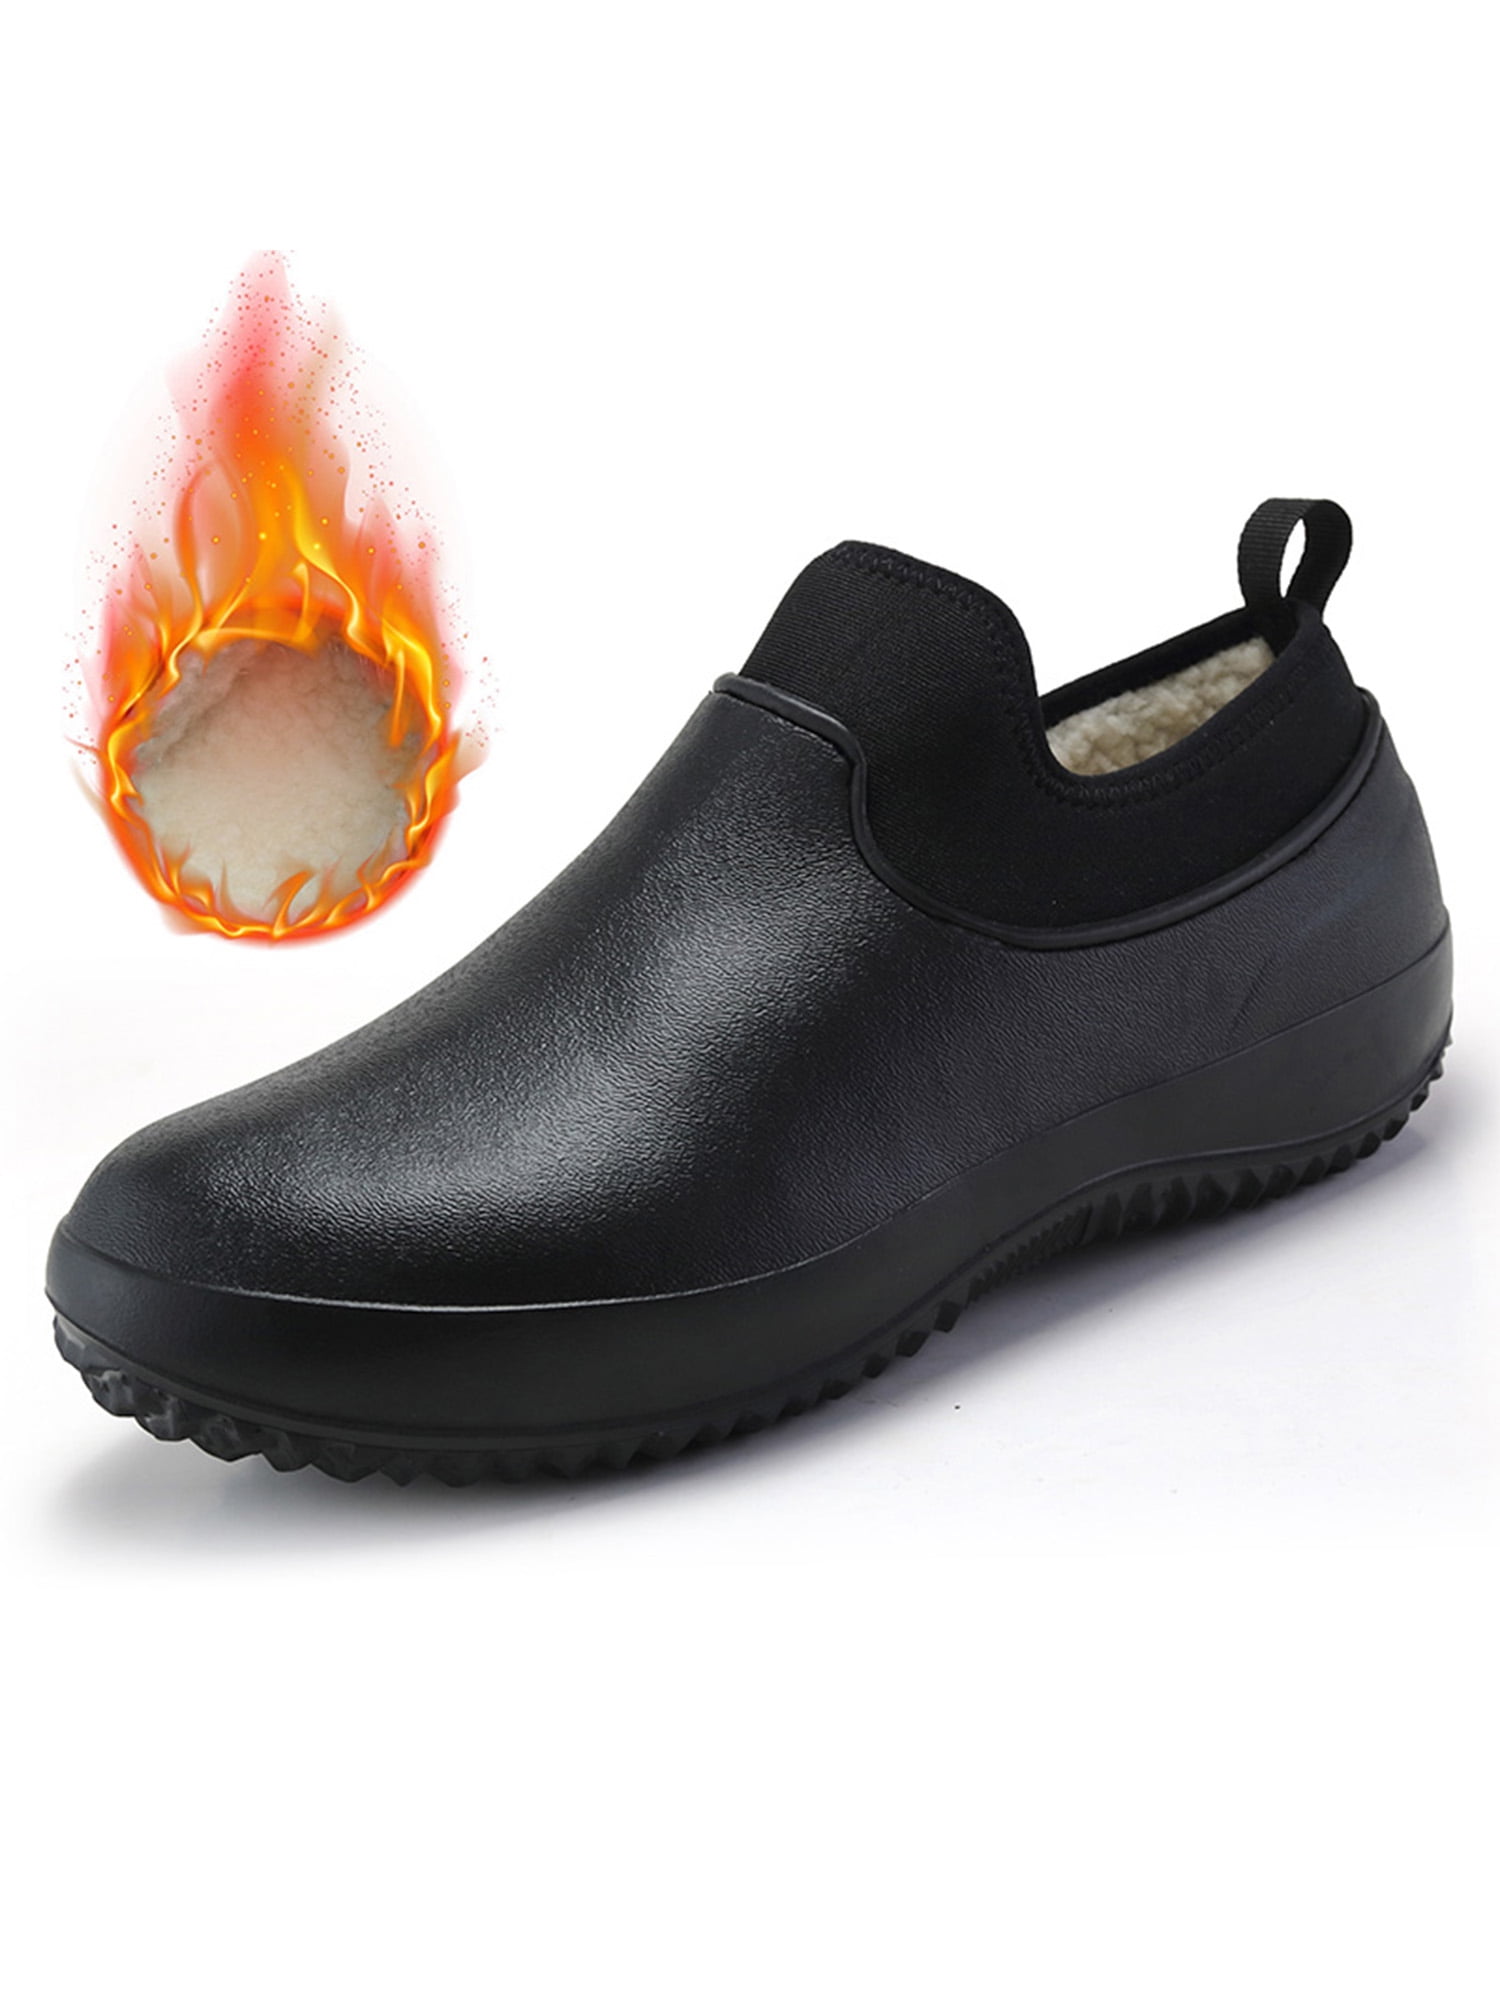 Light Style Non-slip Chef Shoes Kitchen Oil-resistant Waterproof Work Shoes